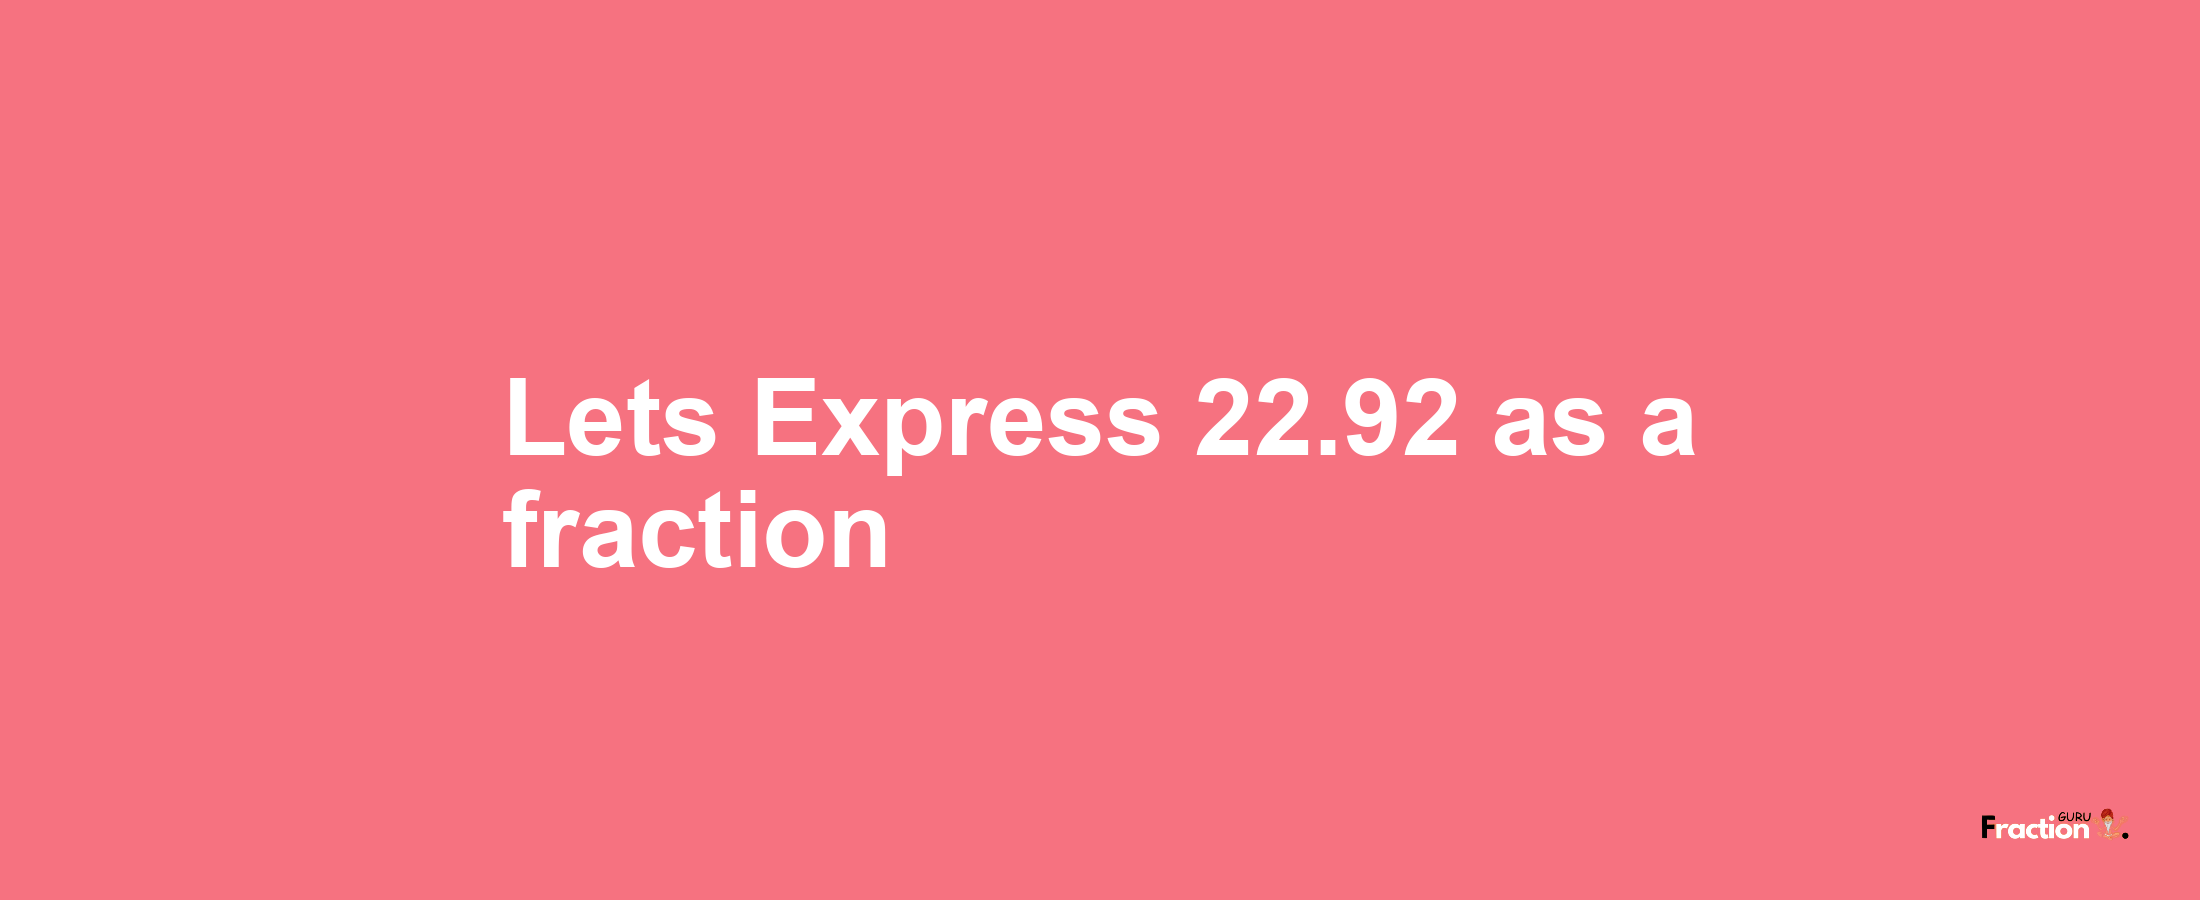 Lets Express 22.92 as afraction